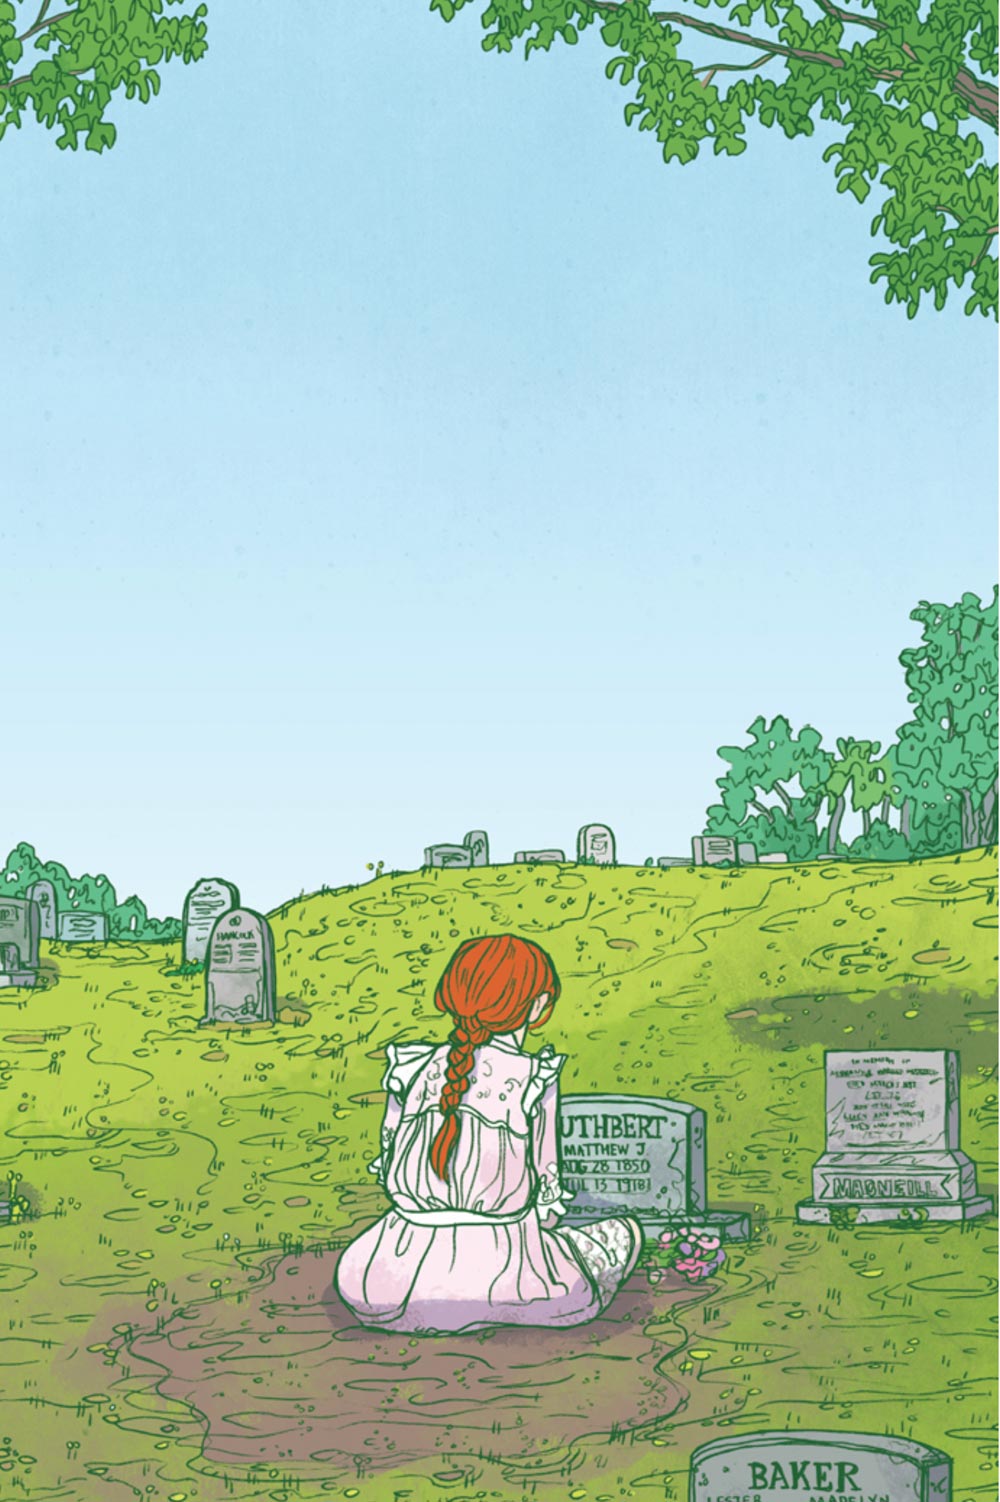 Illustration of Anne Shirley at Matthew Cuthbert's grave from Anne of Green Gables: A Graphic Novel adapted by Mariah Marsden, illustrated by Brenna Thummler